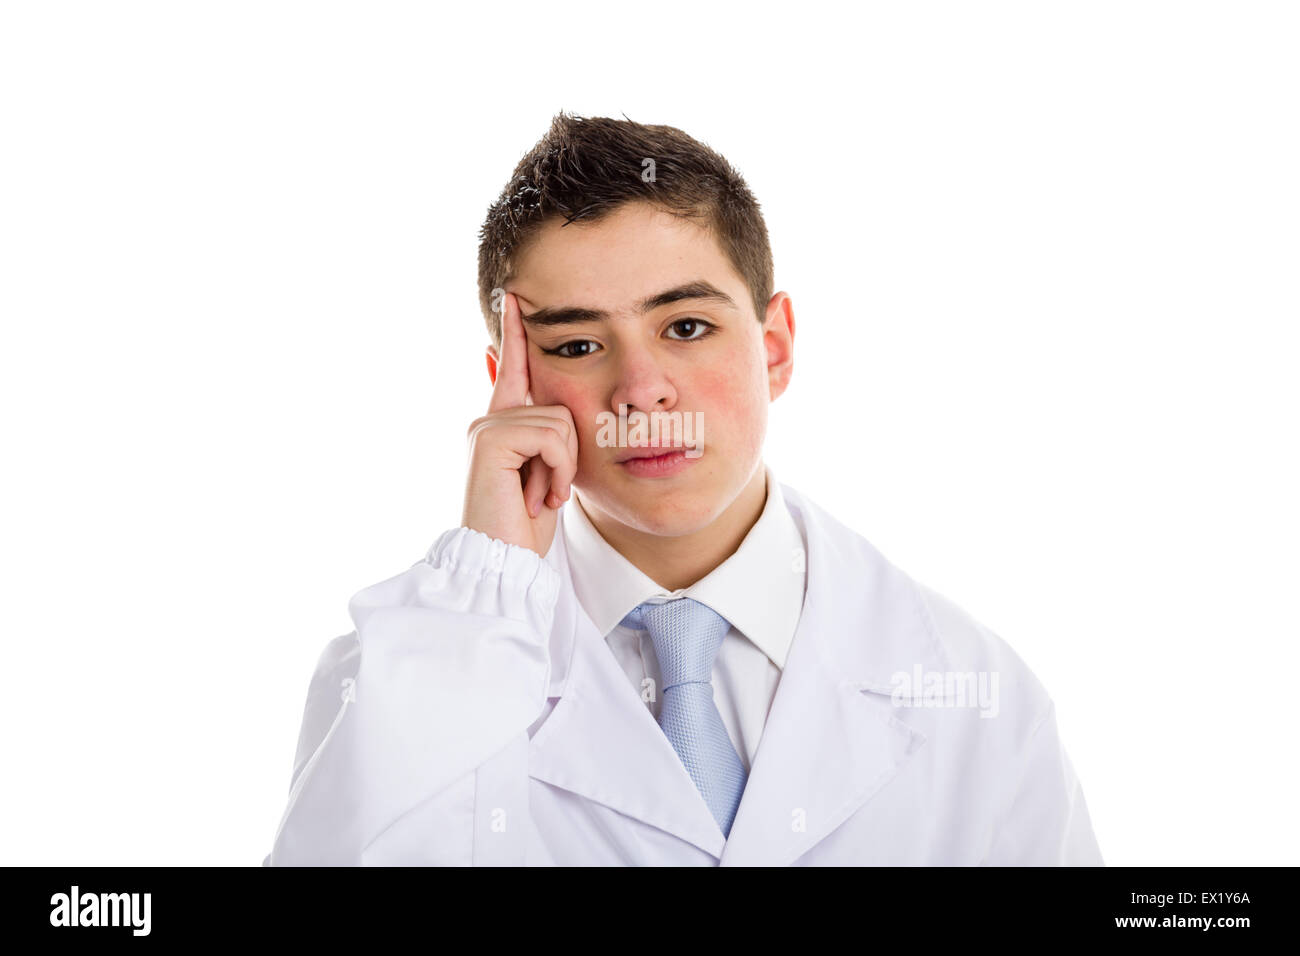 A boy doctor in white coat and blue tie helps to feel medicine more friendly: he is puzzled. His acne skin has not ben retouched Stock Photo